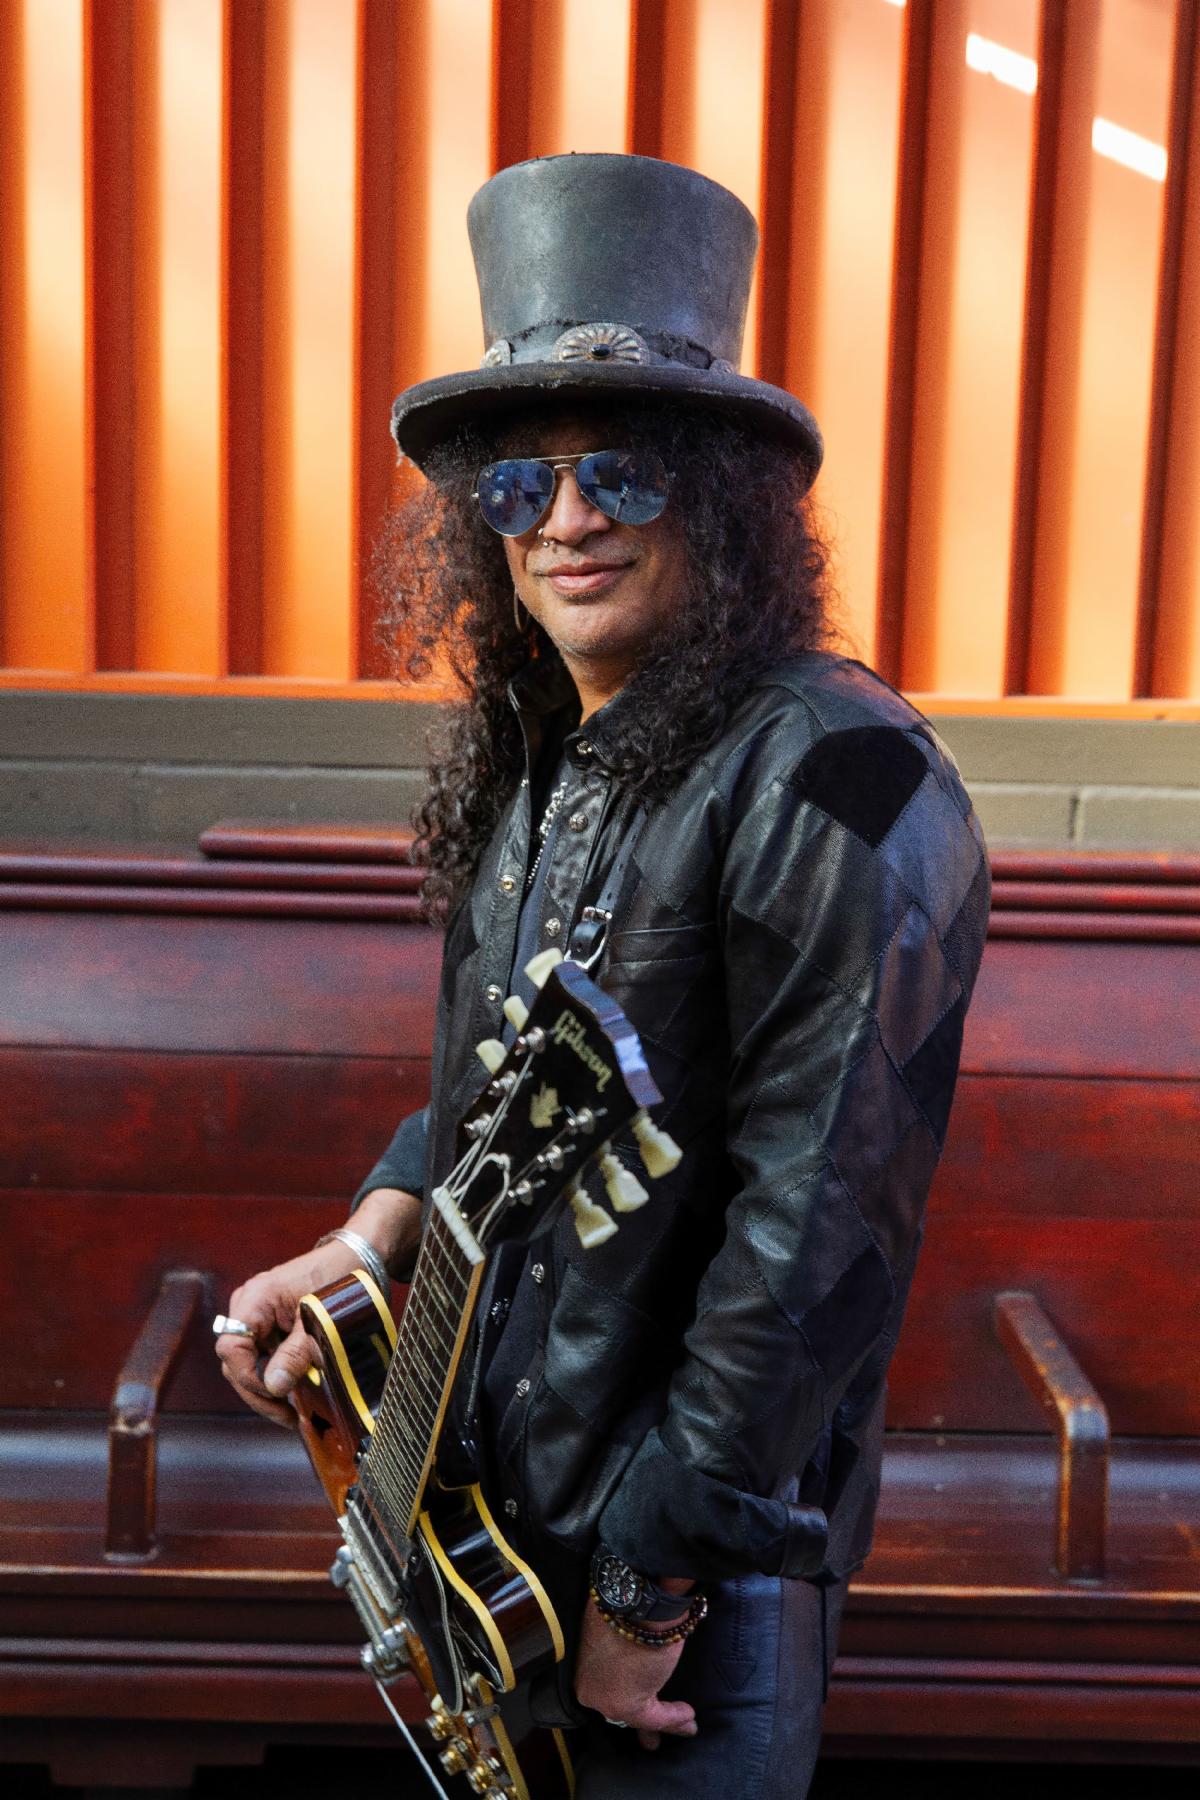 Slash ‘Orgy of the Damned’ Star-Studded Blues Album Set for Release May 17 on Gibson Records, First Single ‘Killing Floor’ with Brian Johnson of AC/DC on Vocals, Out Today